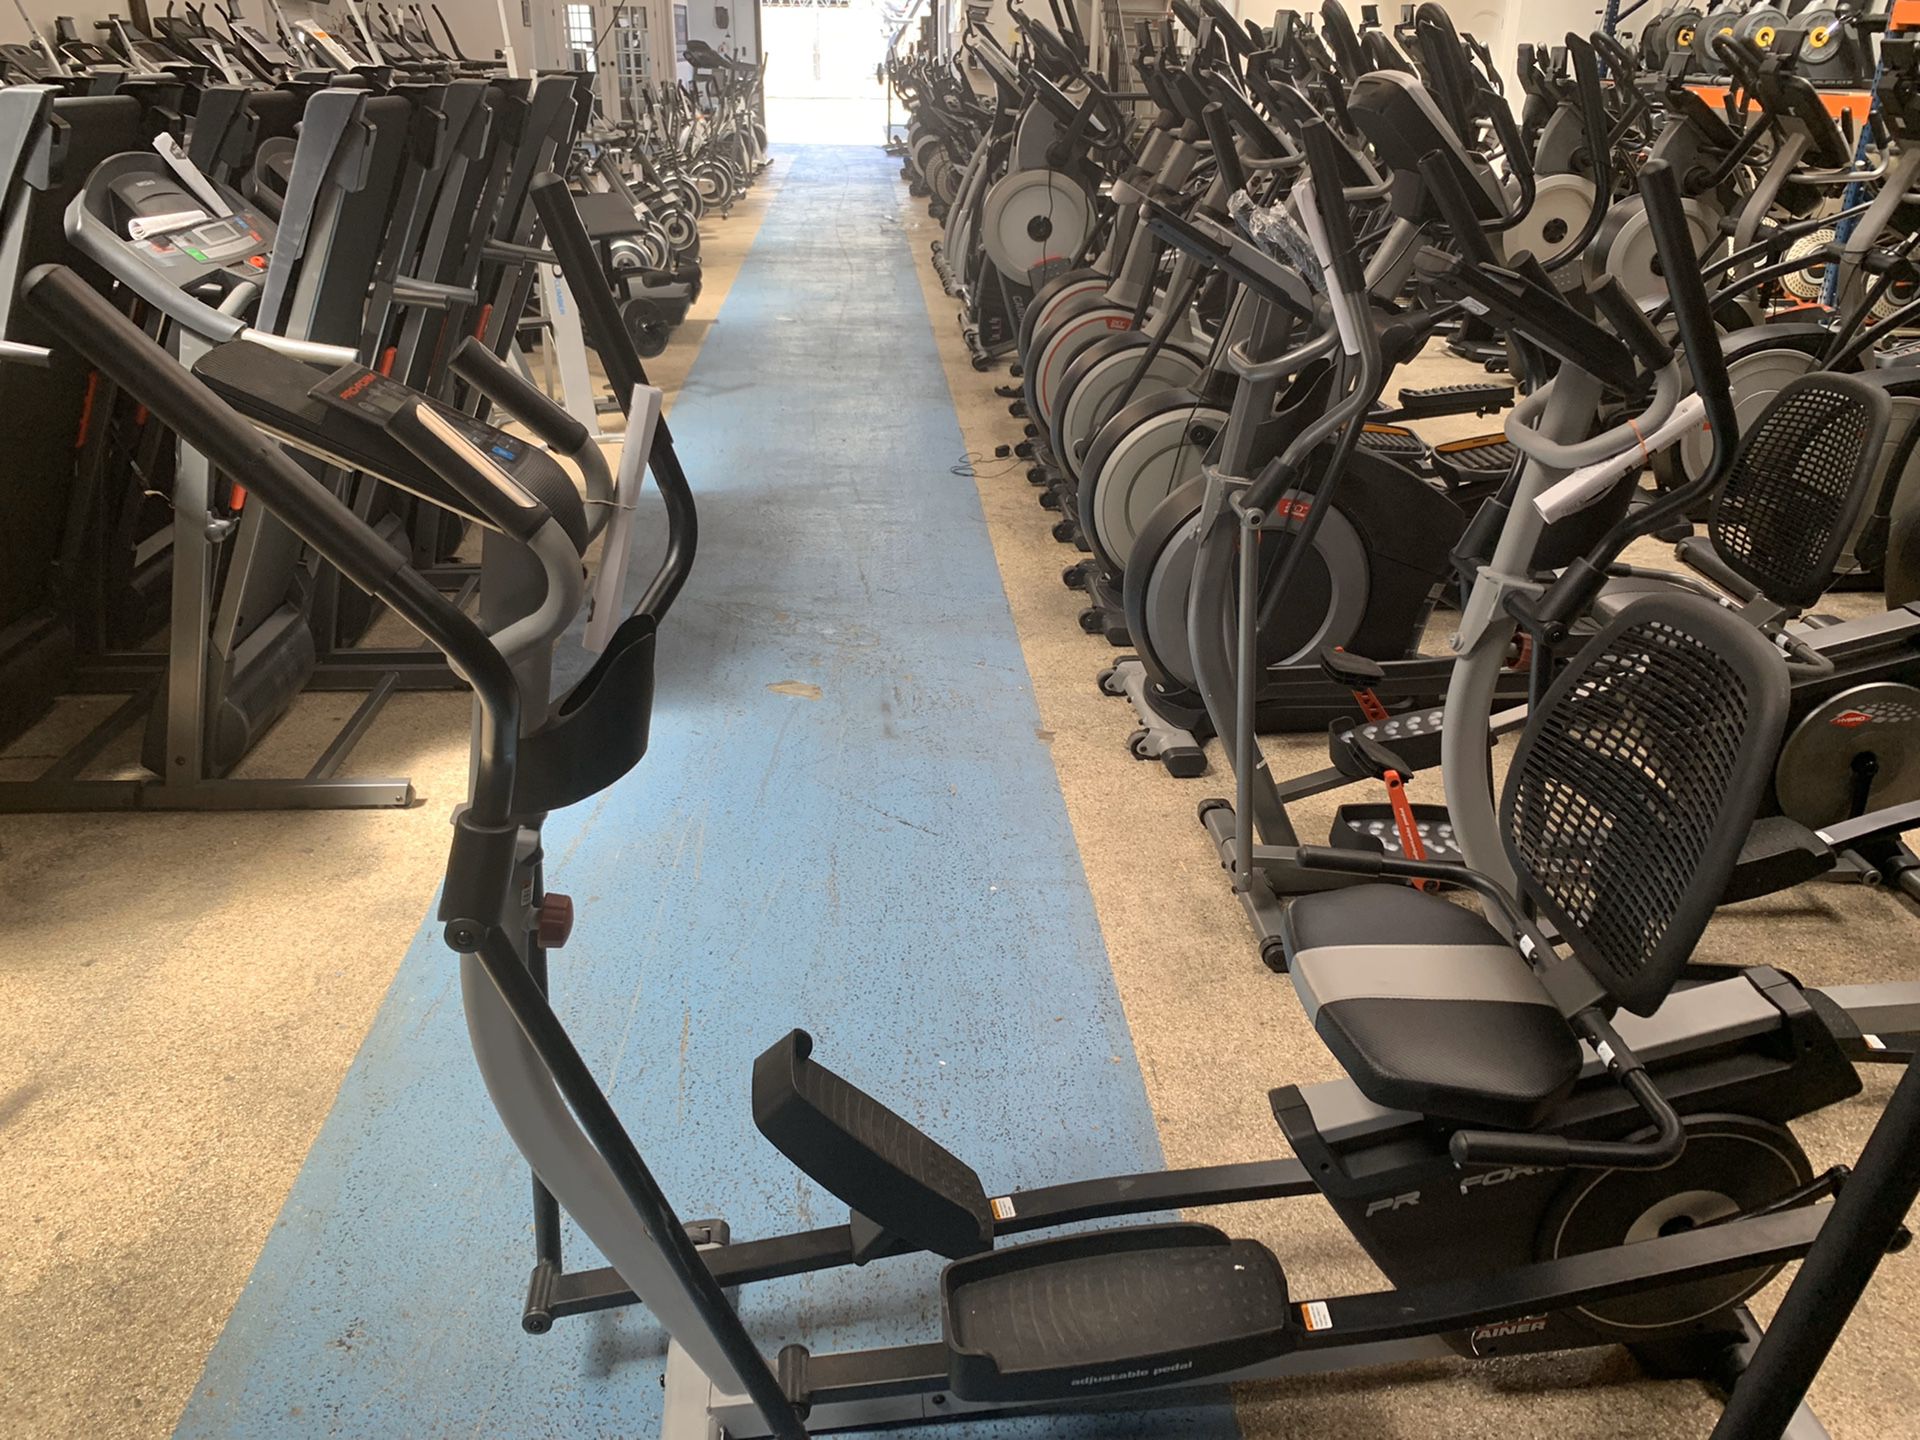 Two machines (Elliptical & Recumbent Bike) for the price of ONE!